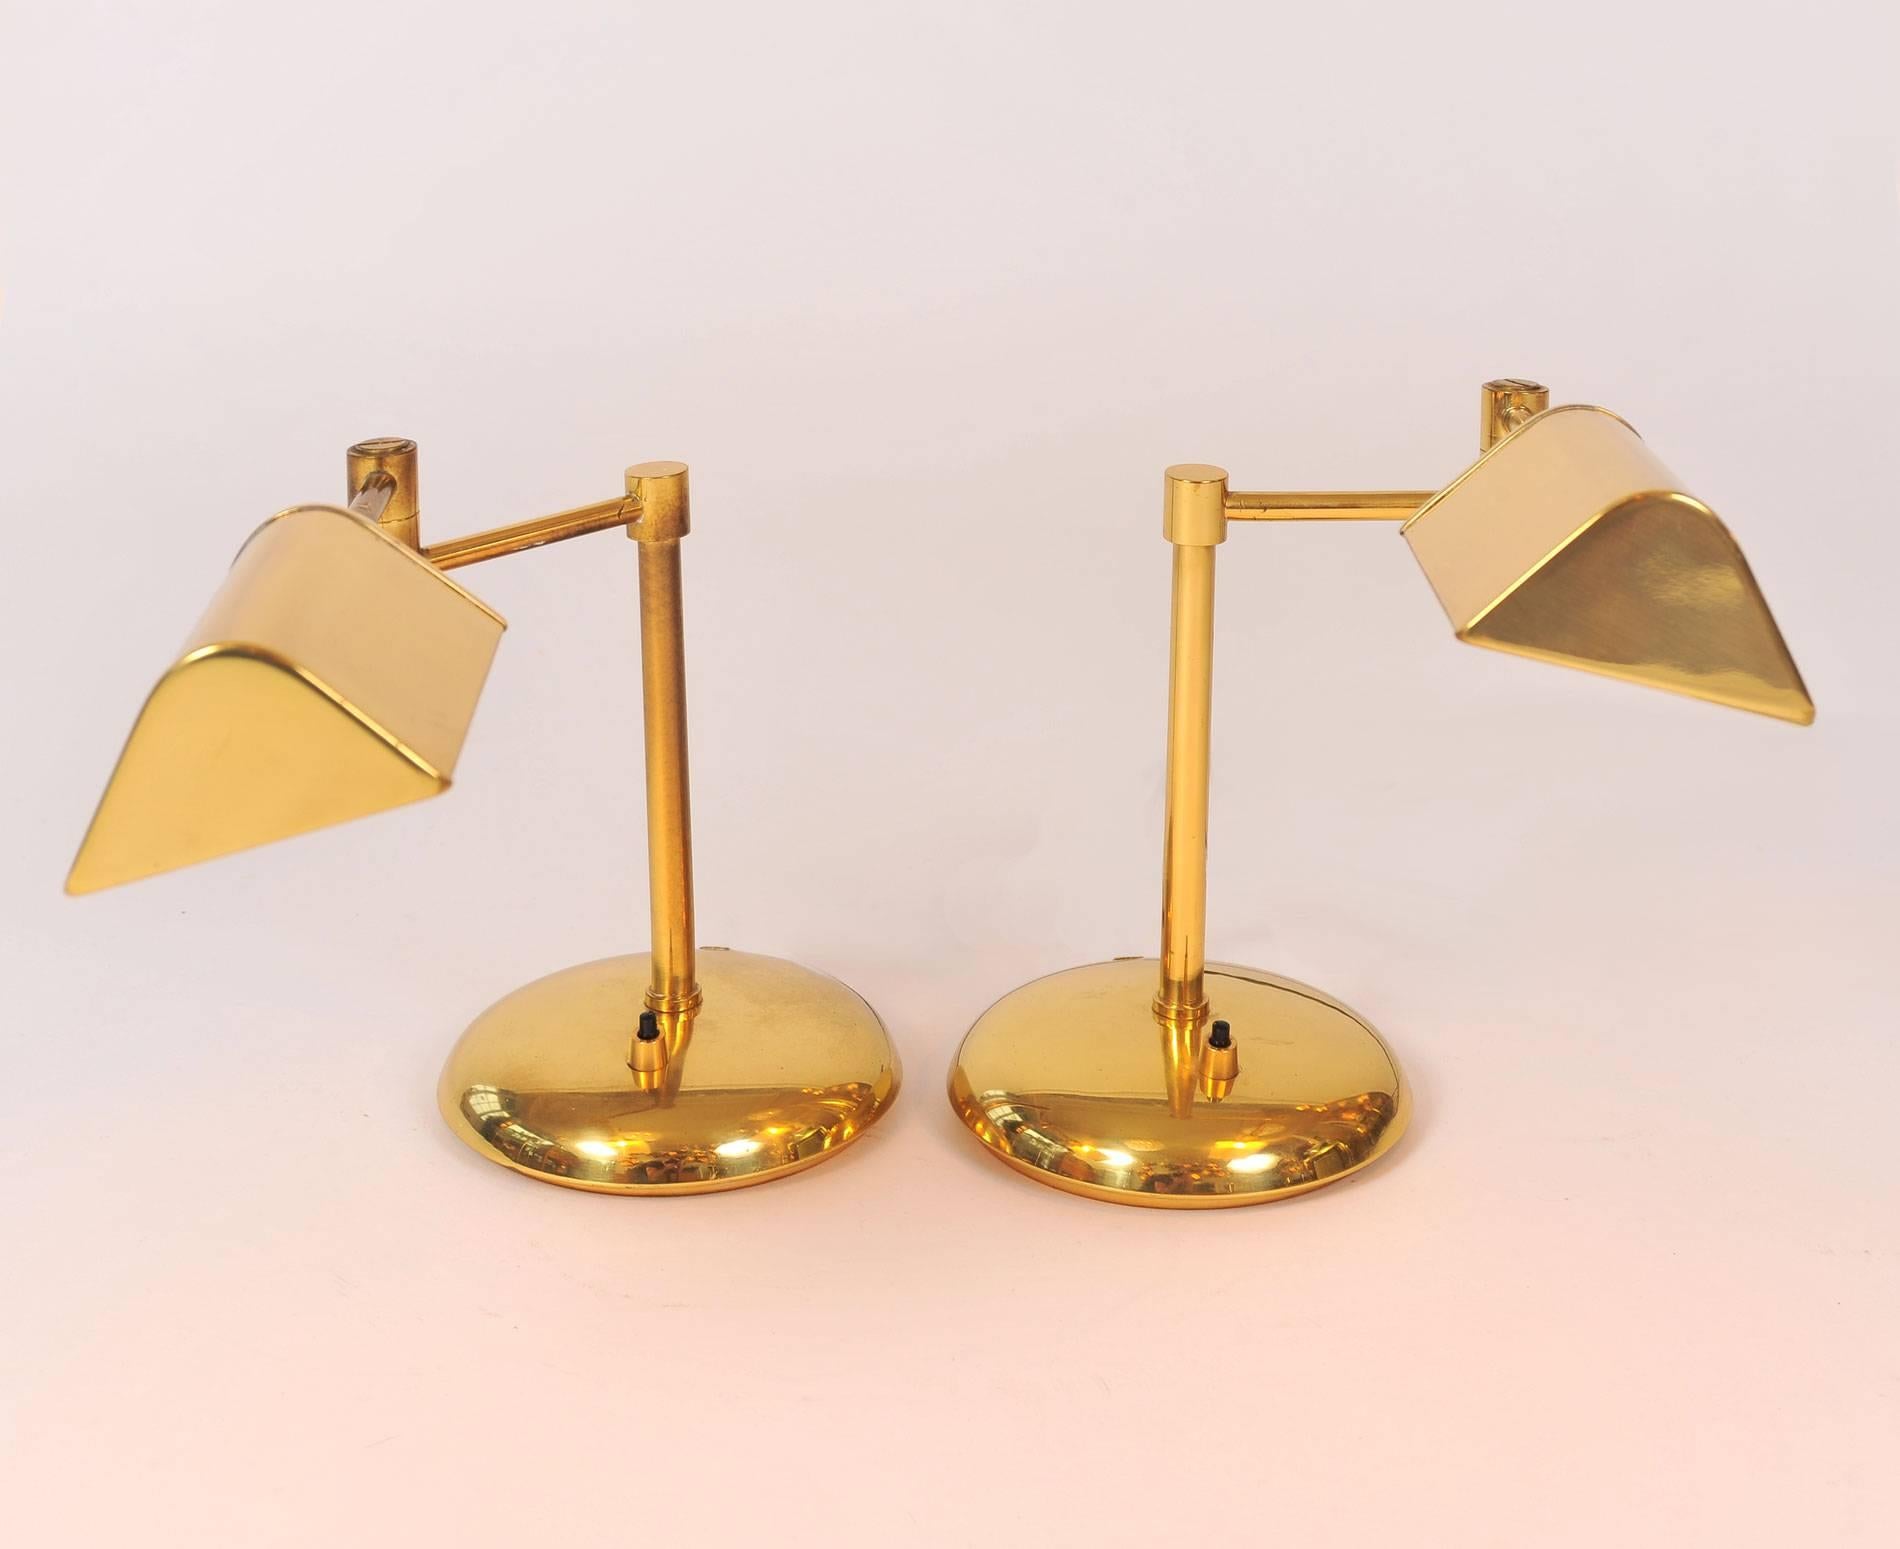 Pair of brass table lamps, each with rotating arm that adjusts lamp position and lampshade handle that adjusts shade position. Circular curved base holds the switch.